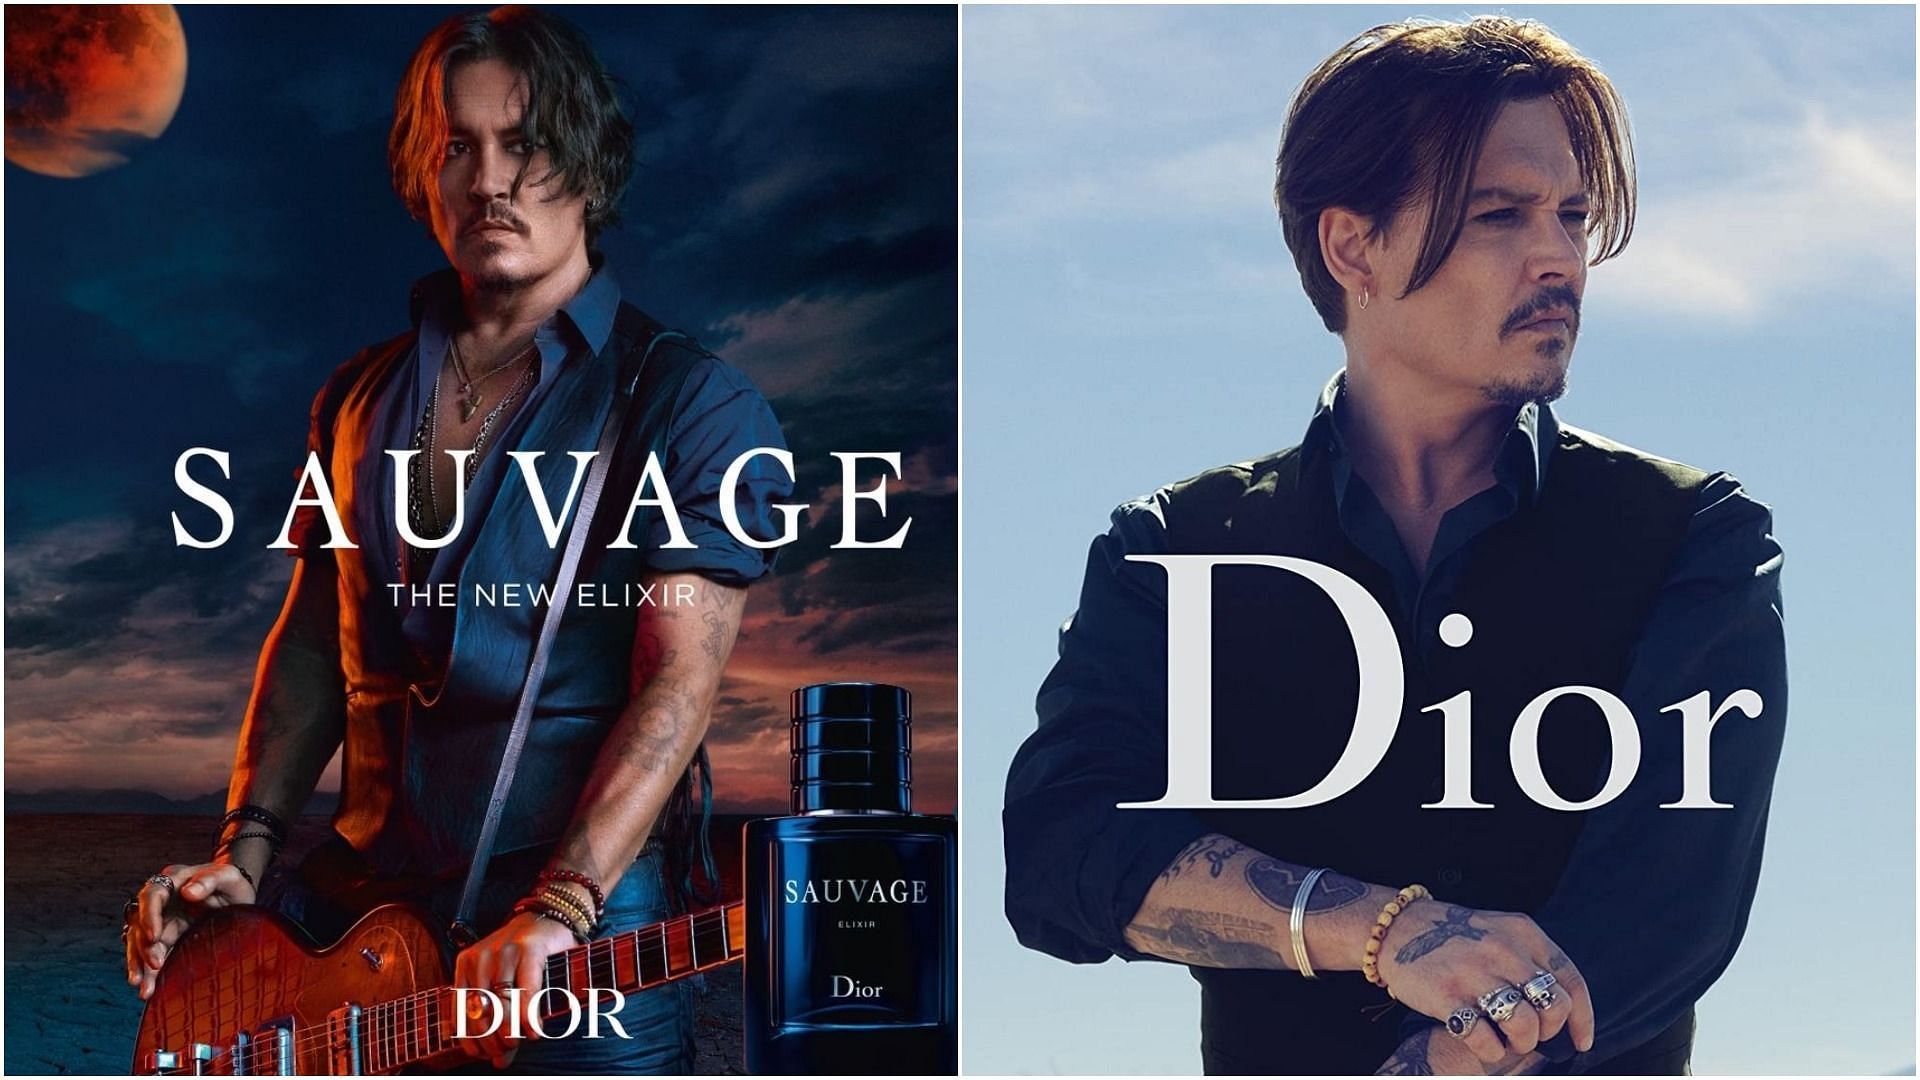 Johnny Depp signs another milliondollar deal and regains his position as  the face of Dior Sauvage  Marca